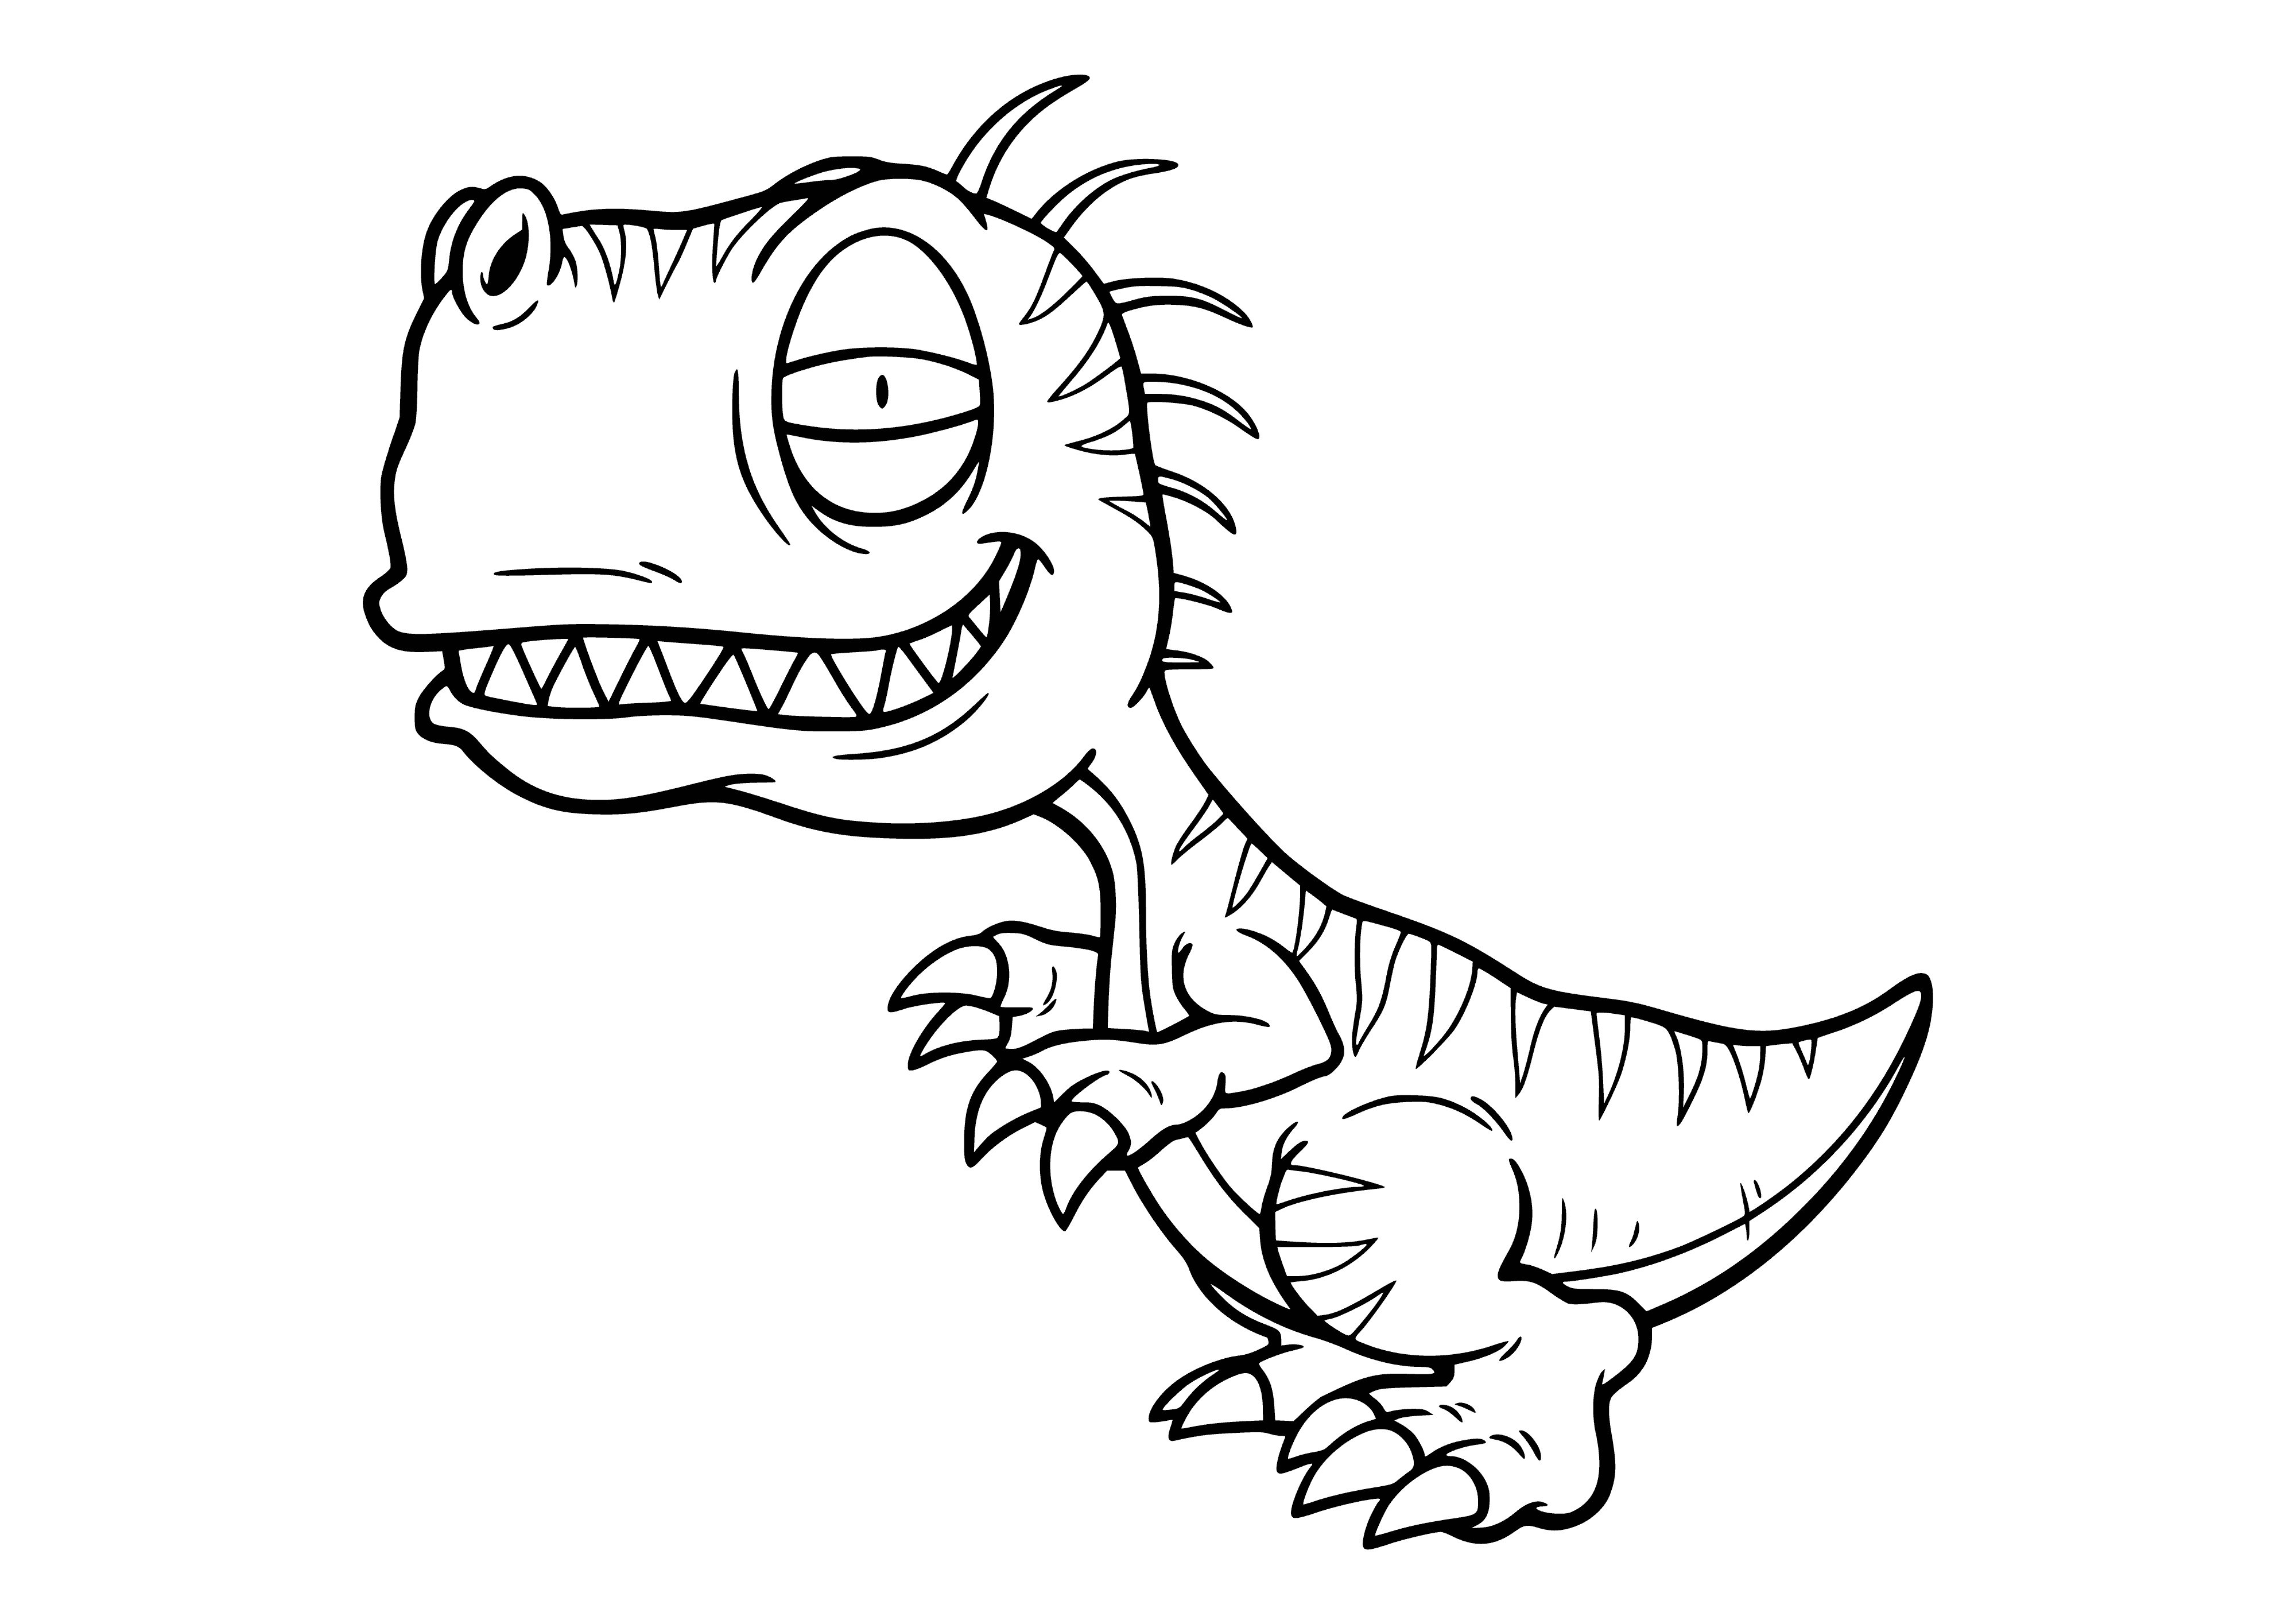 coloring page: Adorable baby tyrannosaurus with long neck, tail, 2 small arms & 3 claws, large head & 2 small horns, yellow eyes. #dinosaur